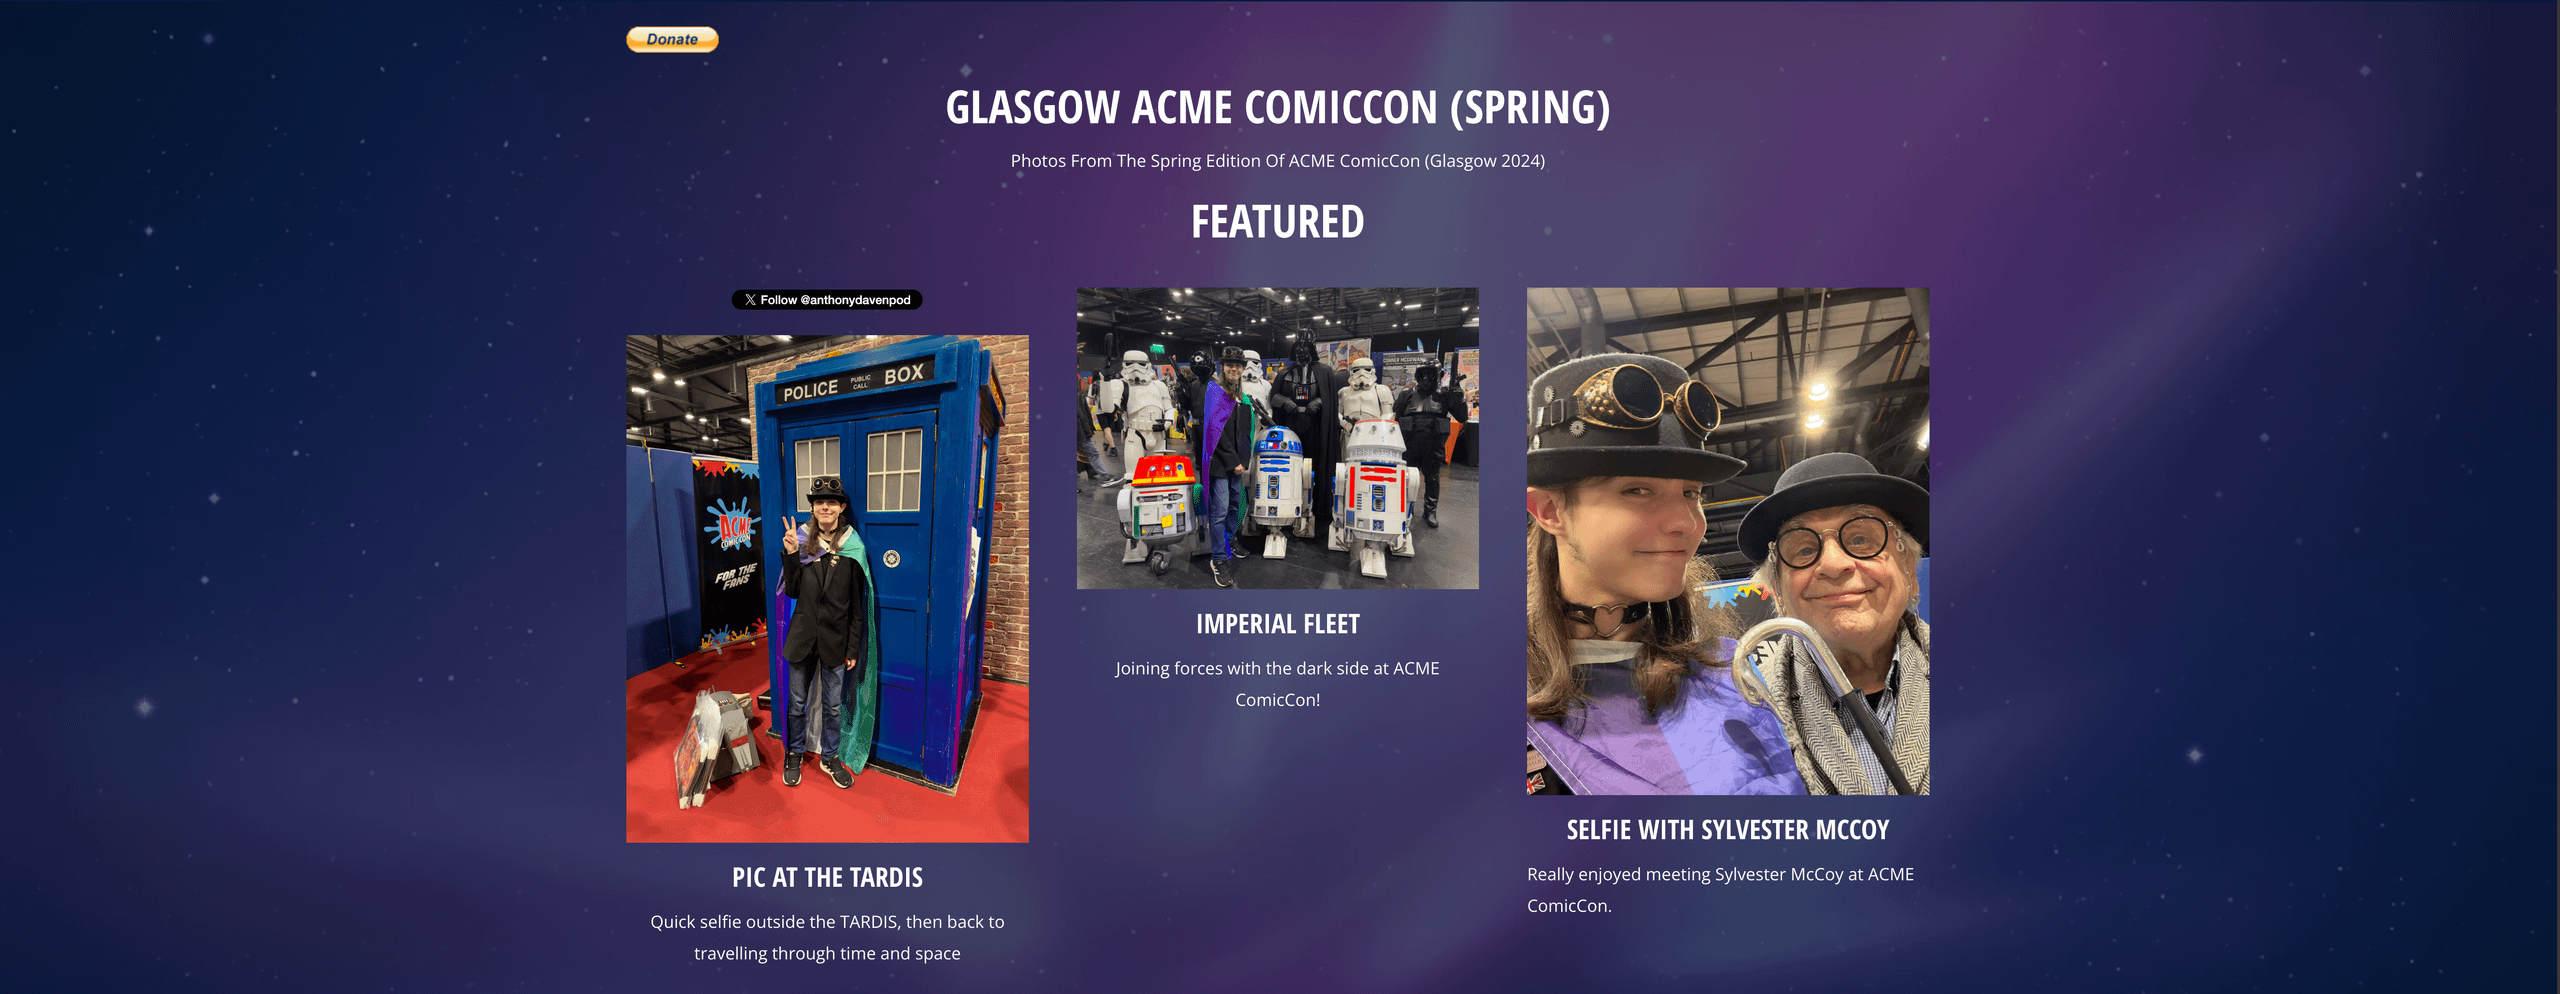 Glasgow ComicCon (Spring 2024) Page - Now Live